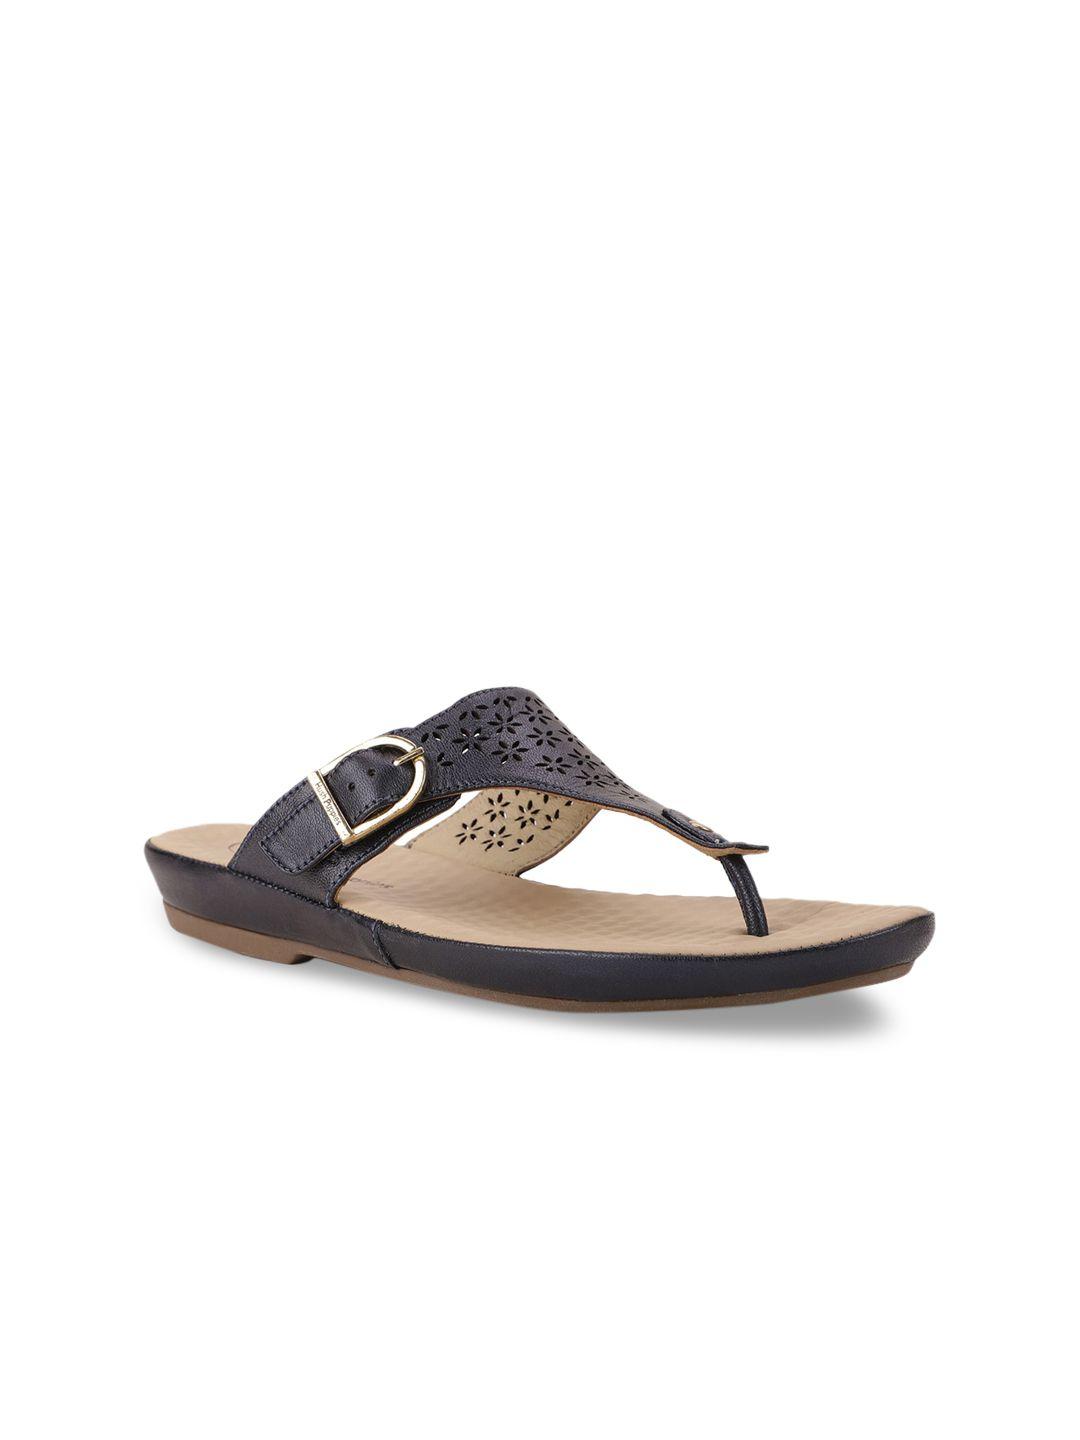 hush-puppies-women-navy-blue-leather-t-strap-flats